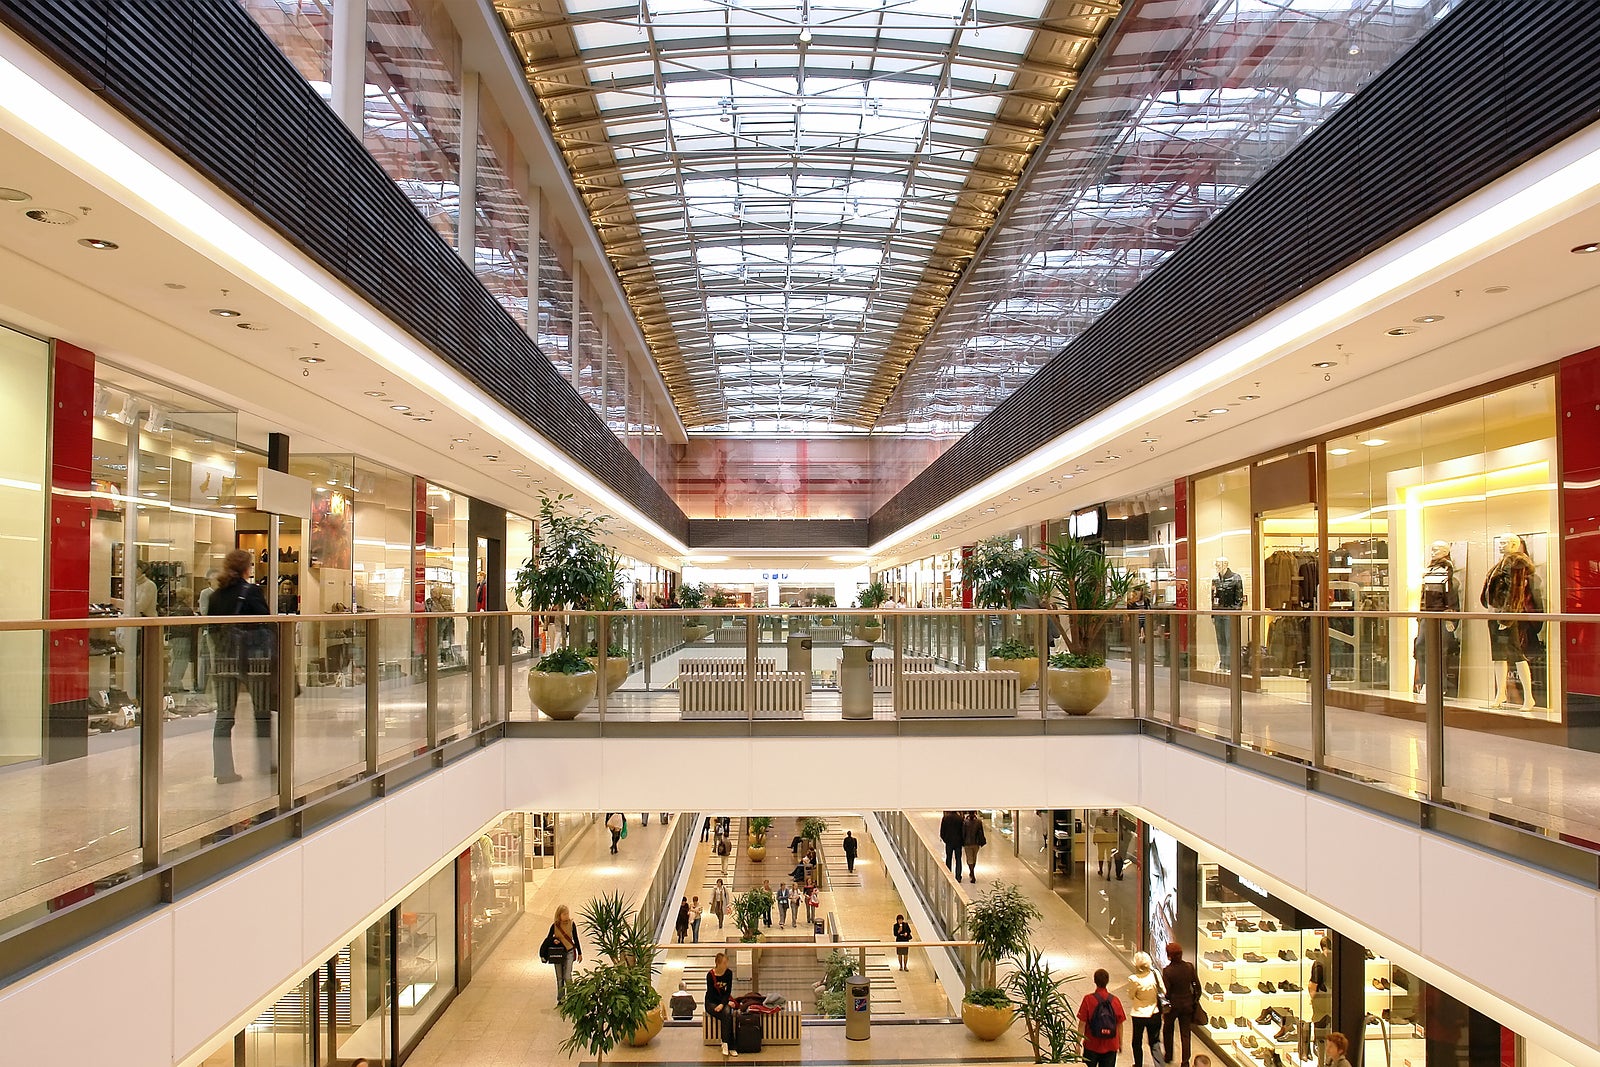 passage in a multilevel shopping mall with shoppers